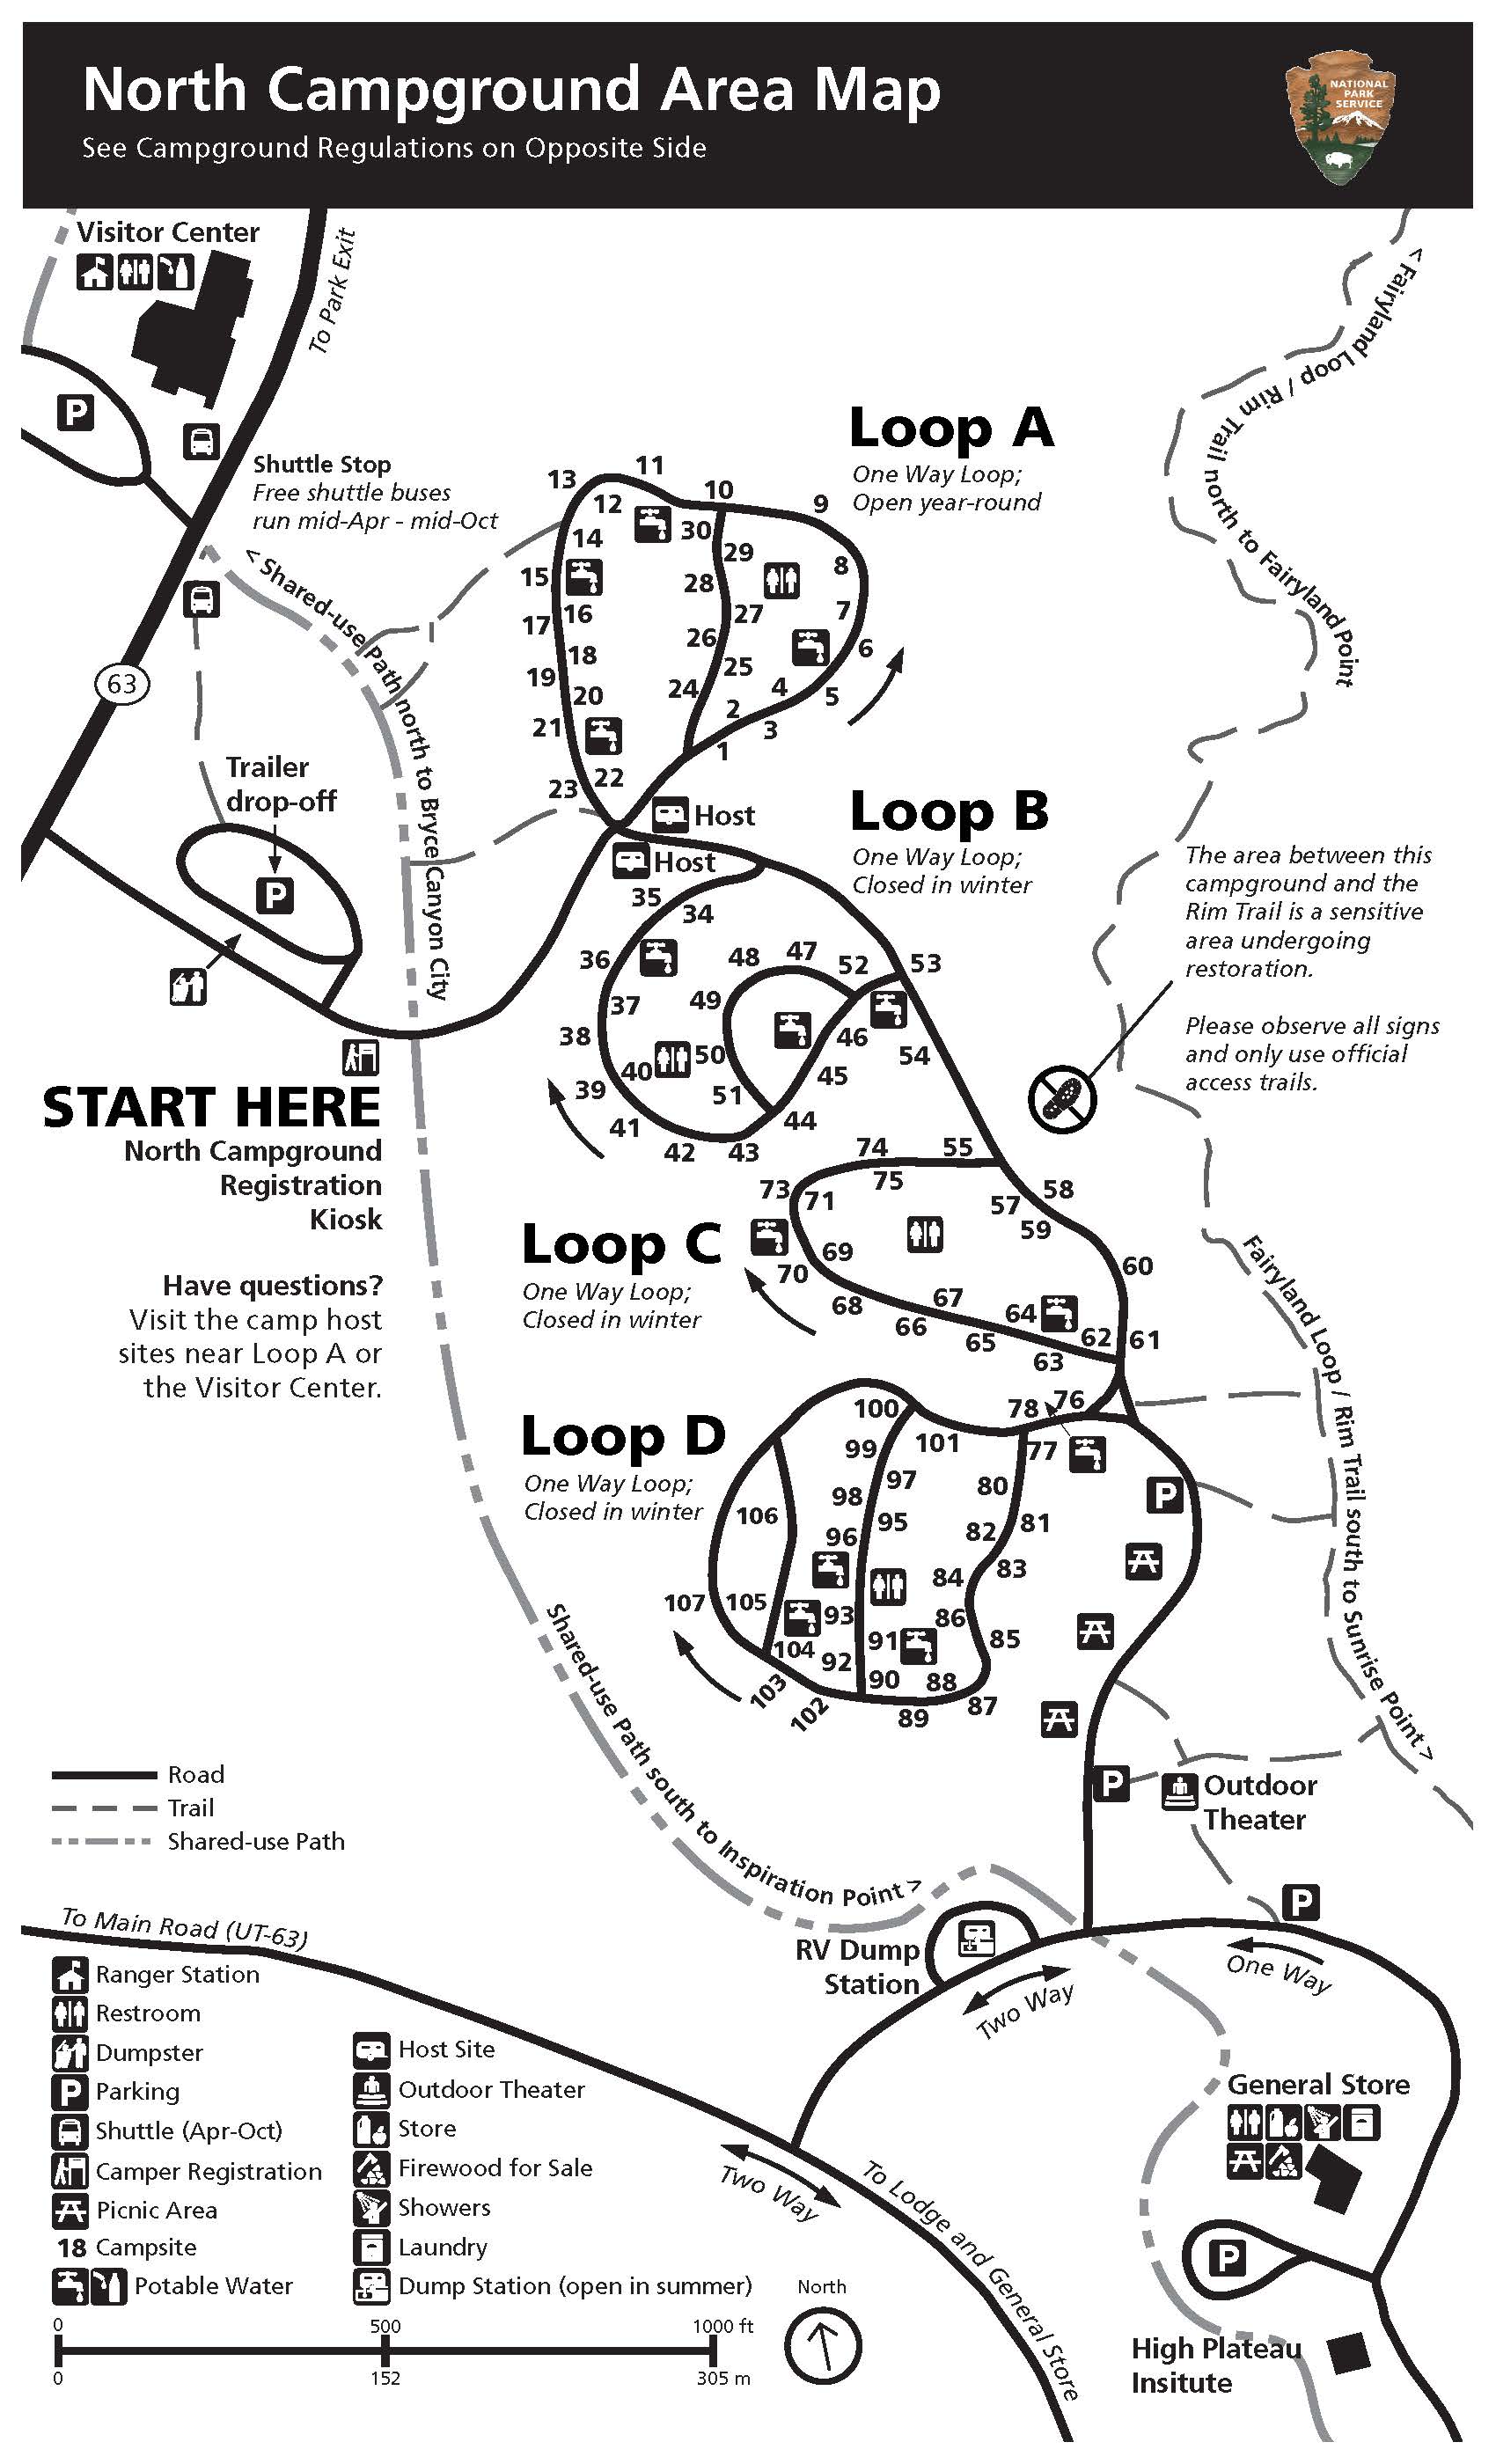 North Campground map in Bryce Canyon National Park